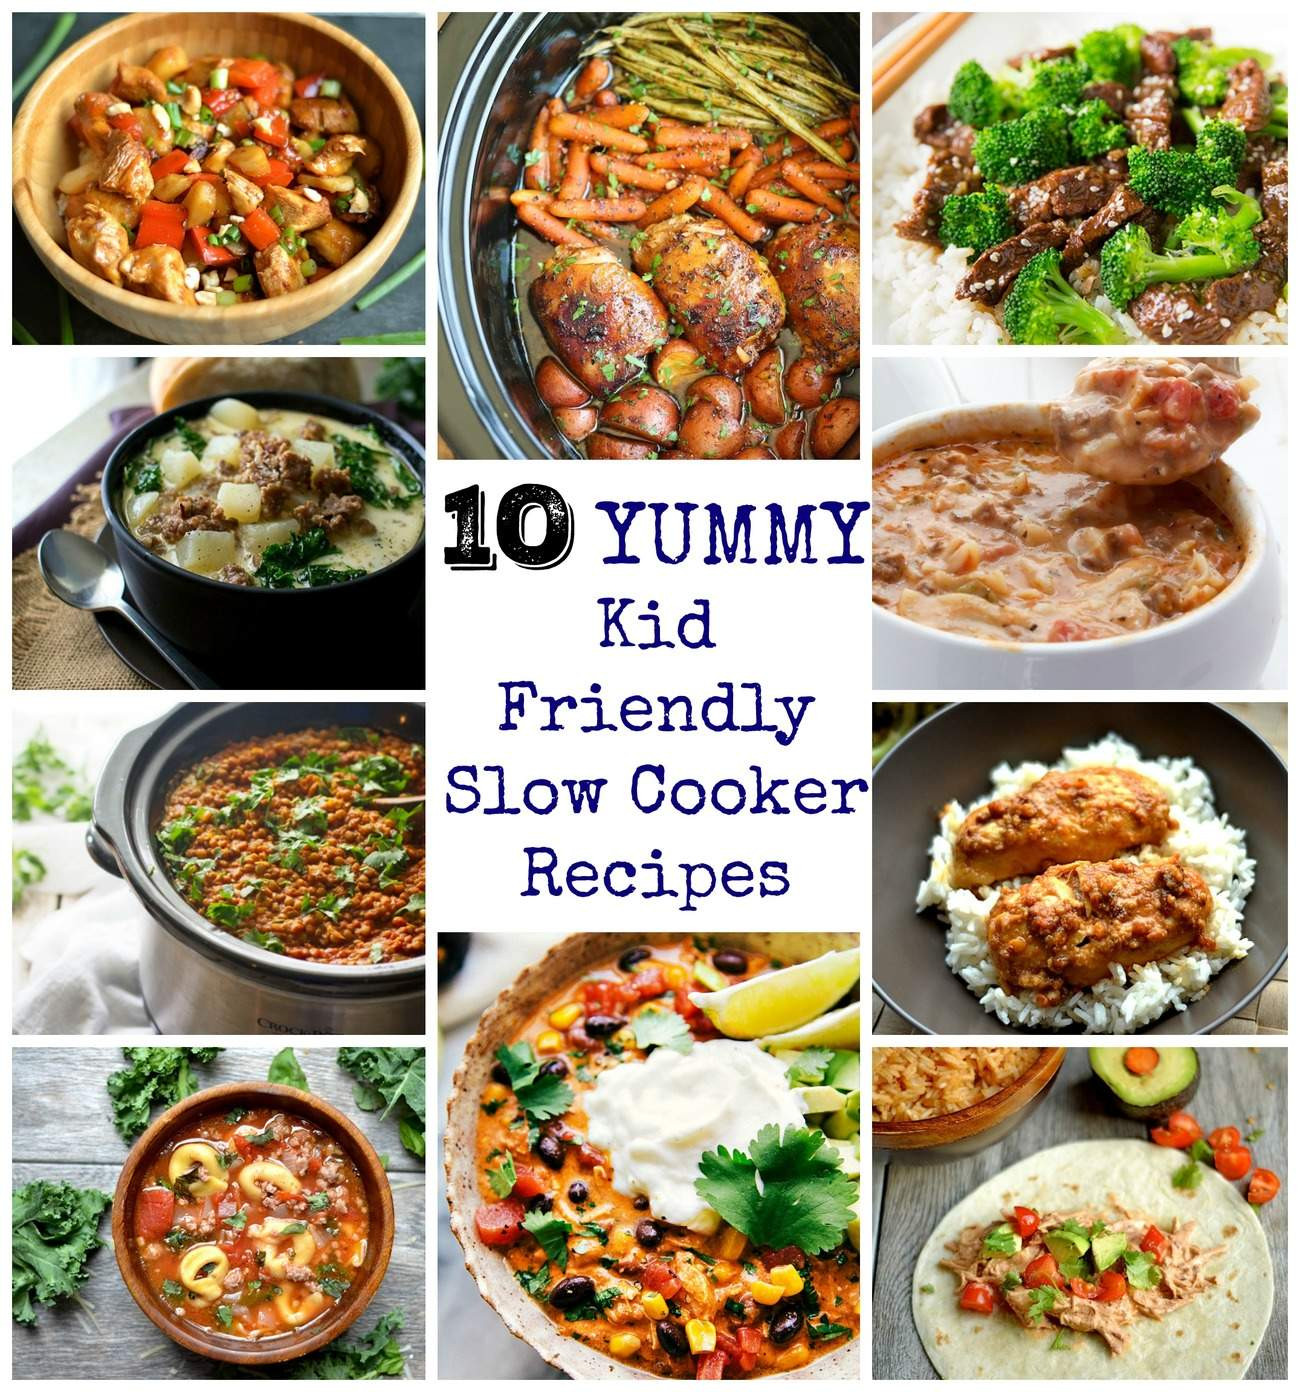 Kid Friendly Crock Pot Dinners
 10 Yummy and Kid Friendly Slow Cooker Recipes ly